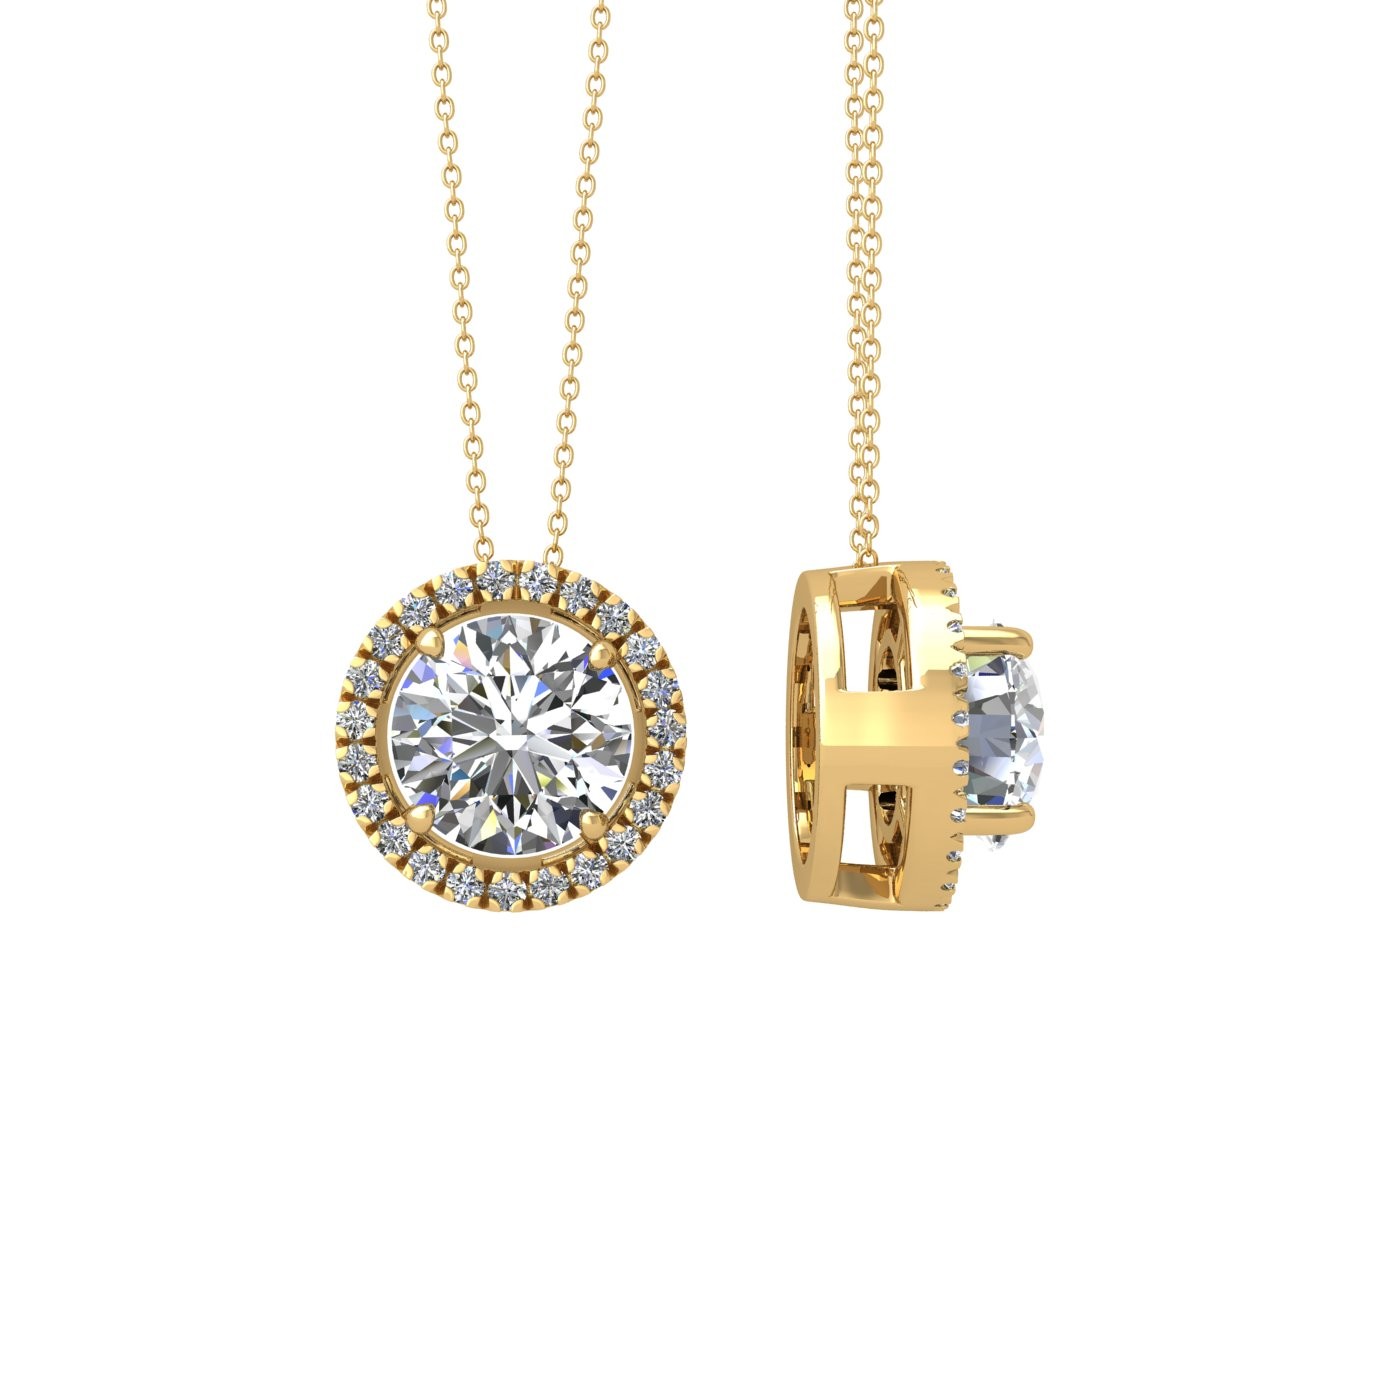 18k yellow gold 0,5 ct 4 prong round shape diamond pendant with diamond pavÉ set halo including chain seperate from the pendant